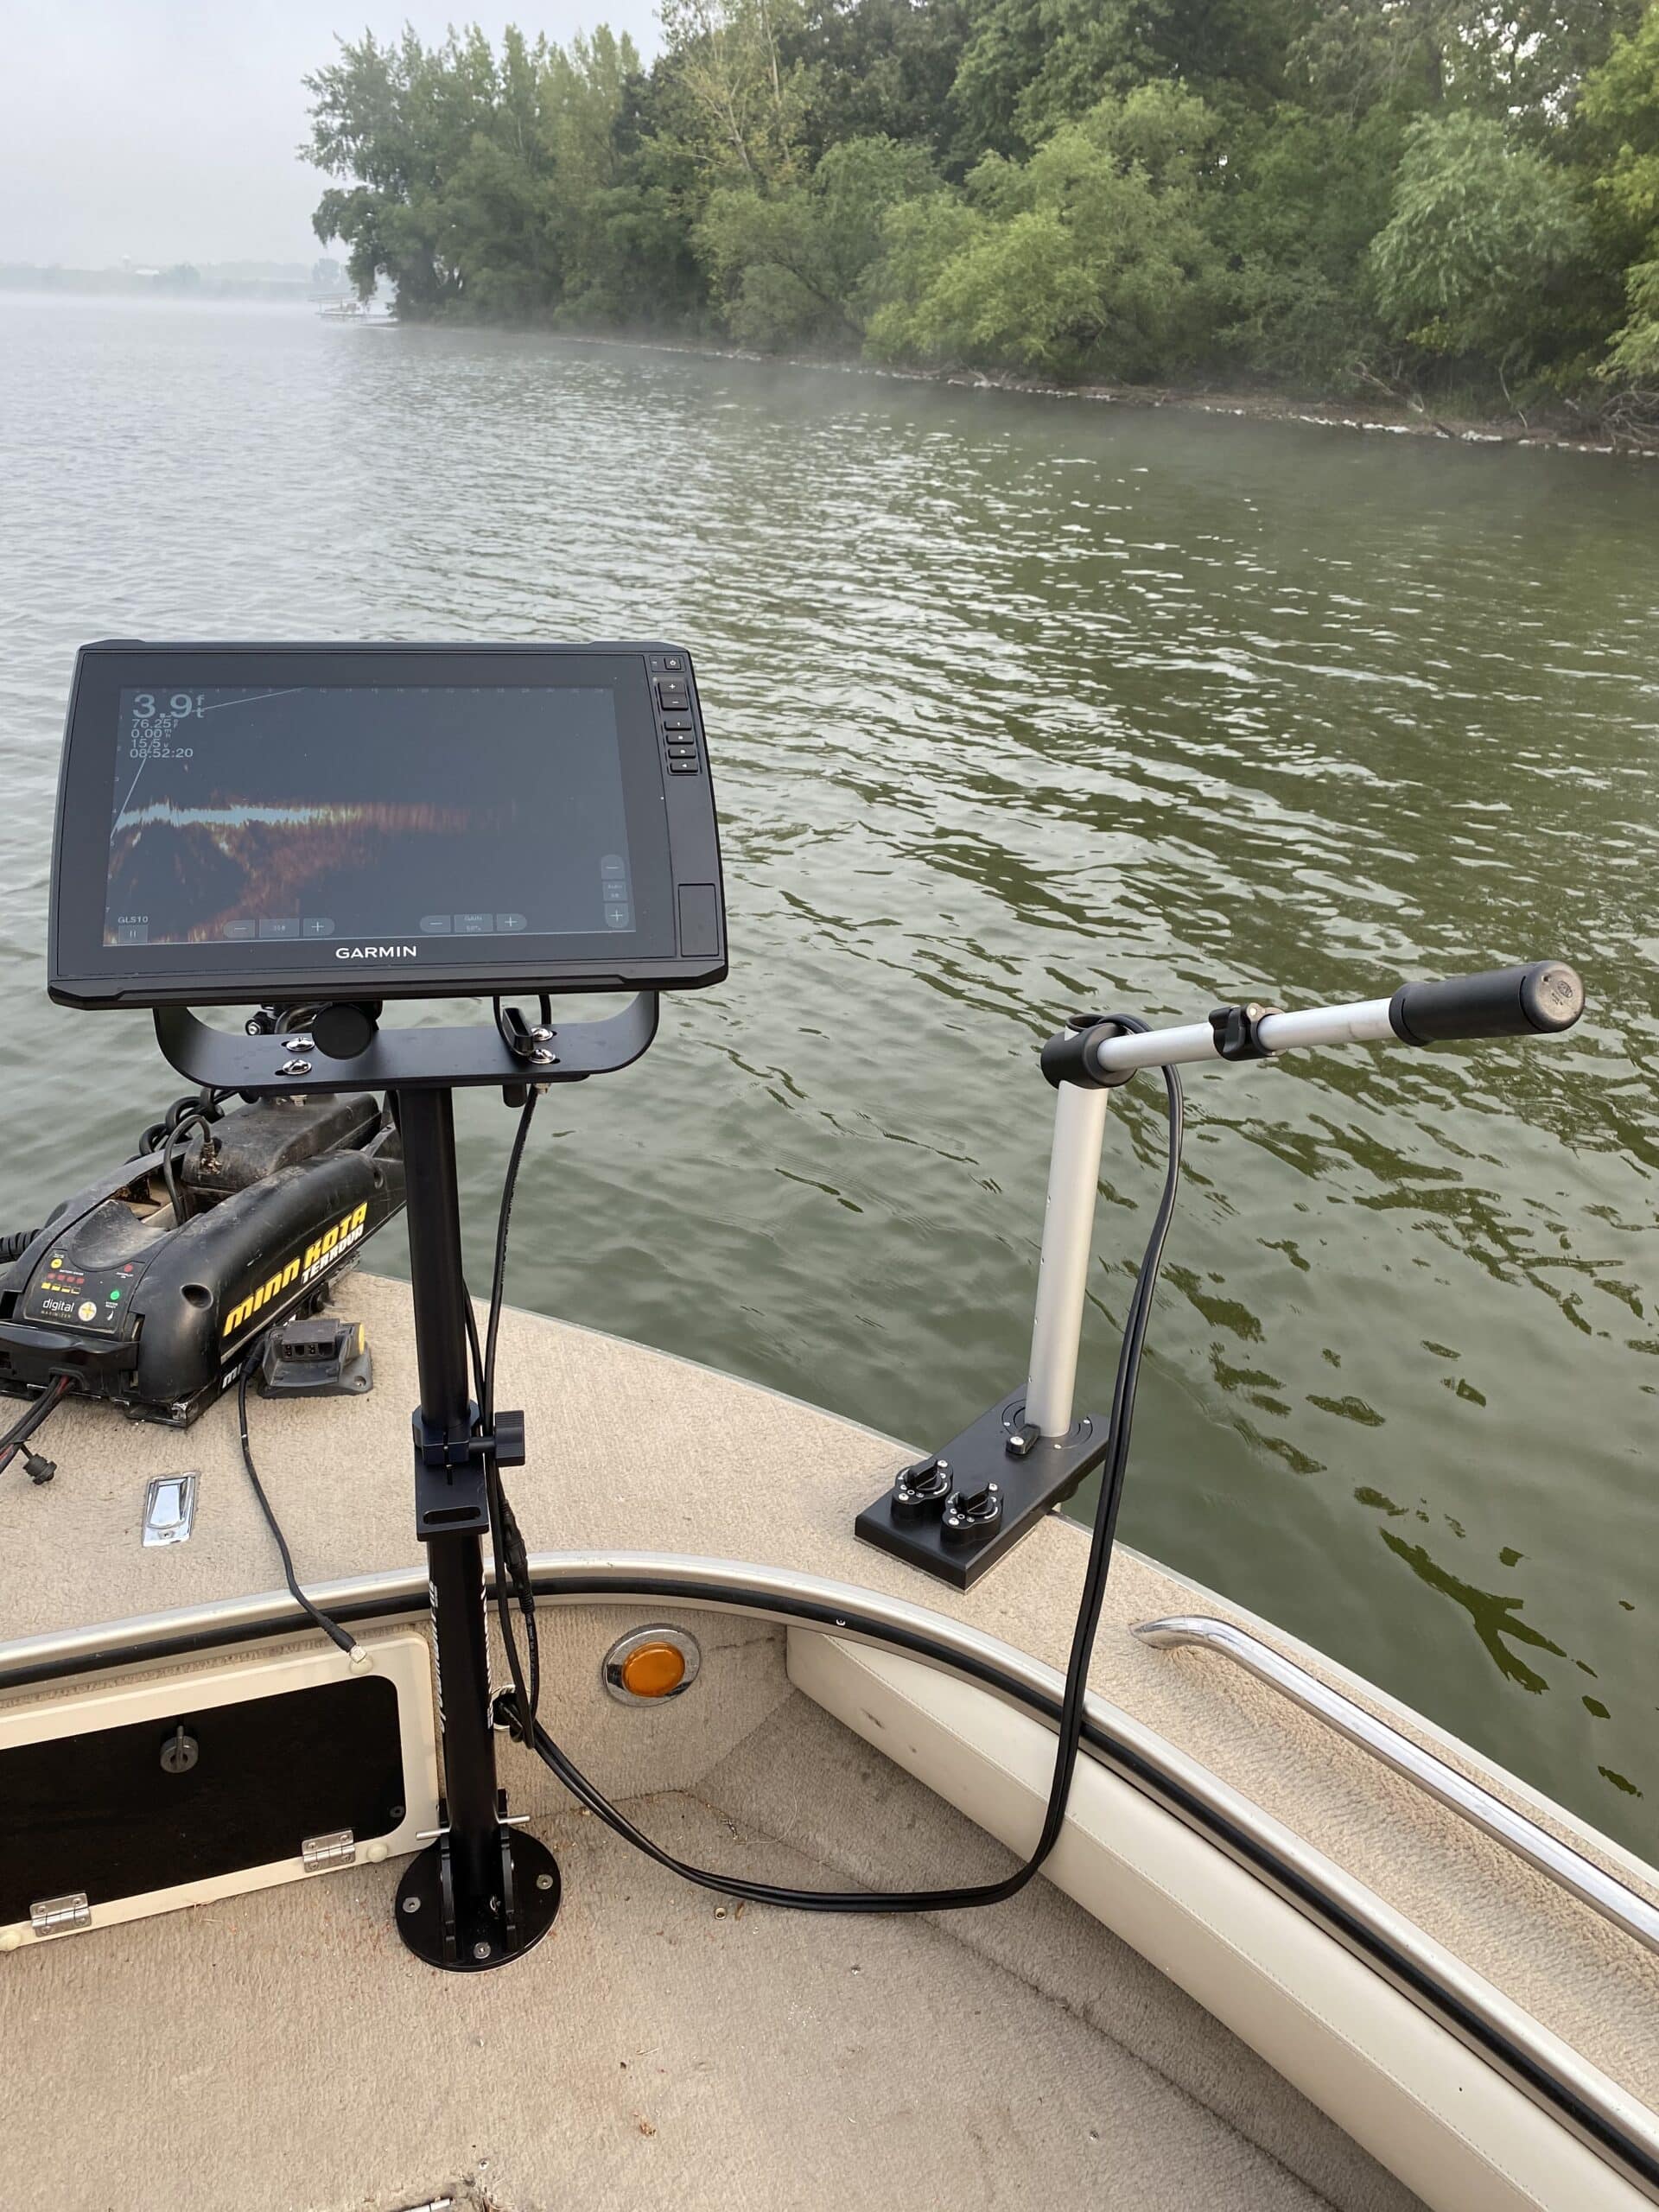 https://www.fishingspecialties.com/wp-content/uploads/2021/12/Magnetic-baseplate-Garmin-Livescope-and-stowaway-xl-scaled.jpg